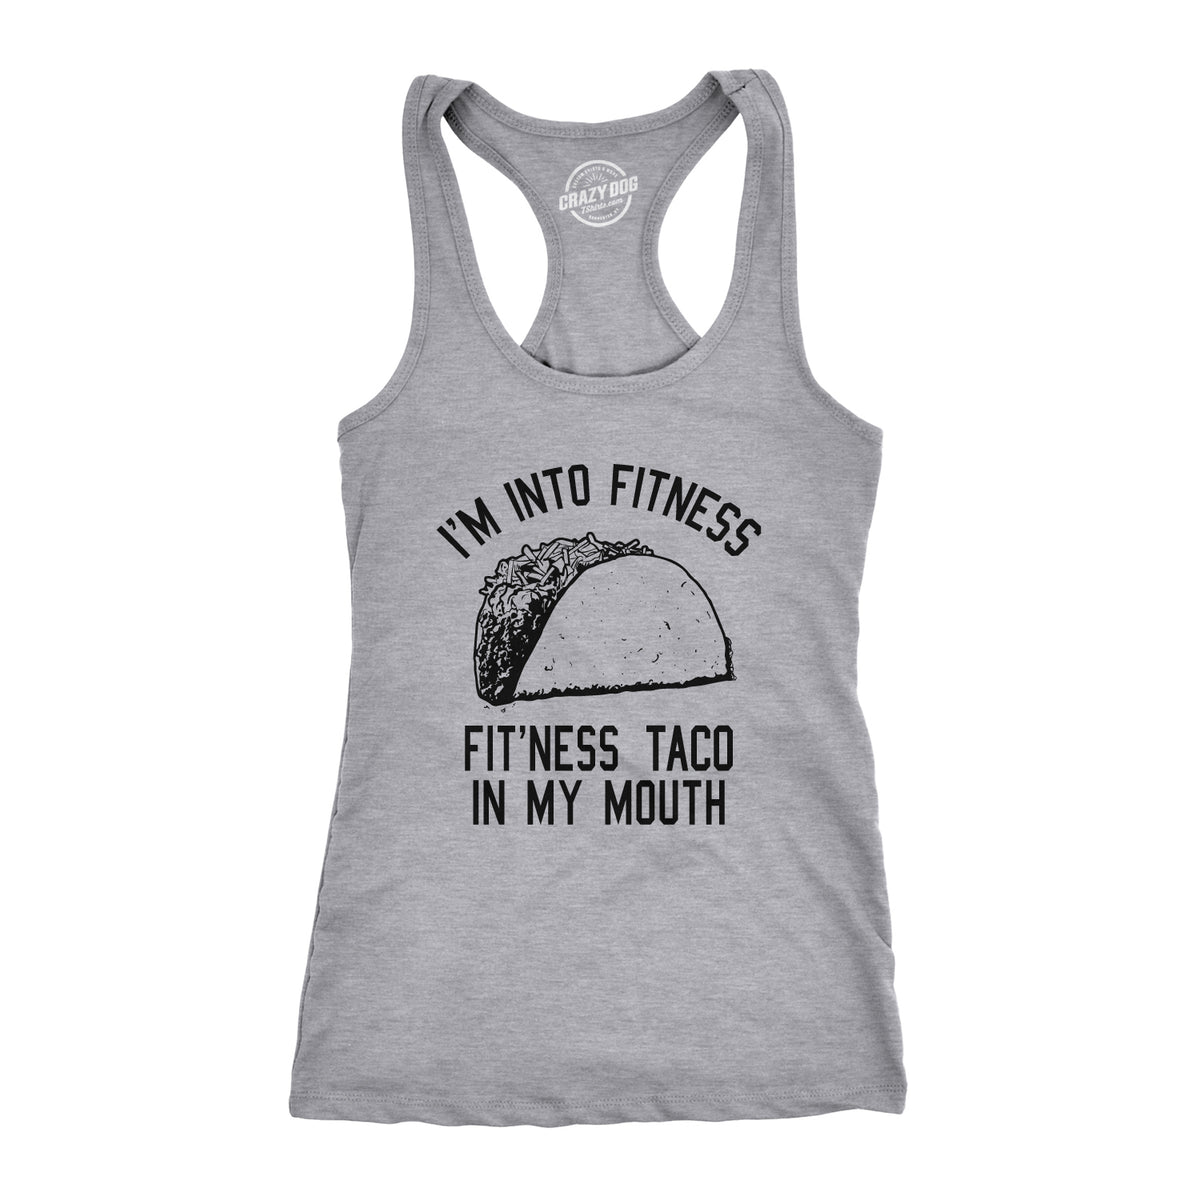 Funny Light Heather Grey I&#39;m Into Fitness Fit&#39;ness Taco In My Mouth Womens Tank Top Nerdy Cinco De Mayo Fitness Tee